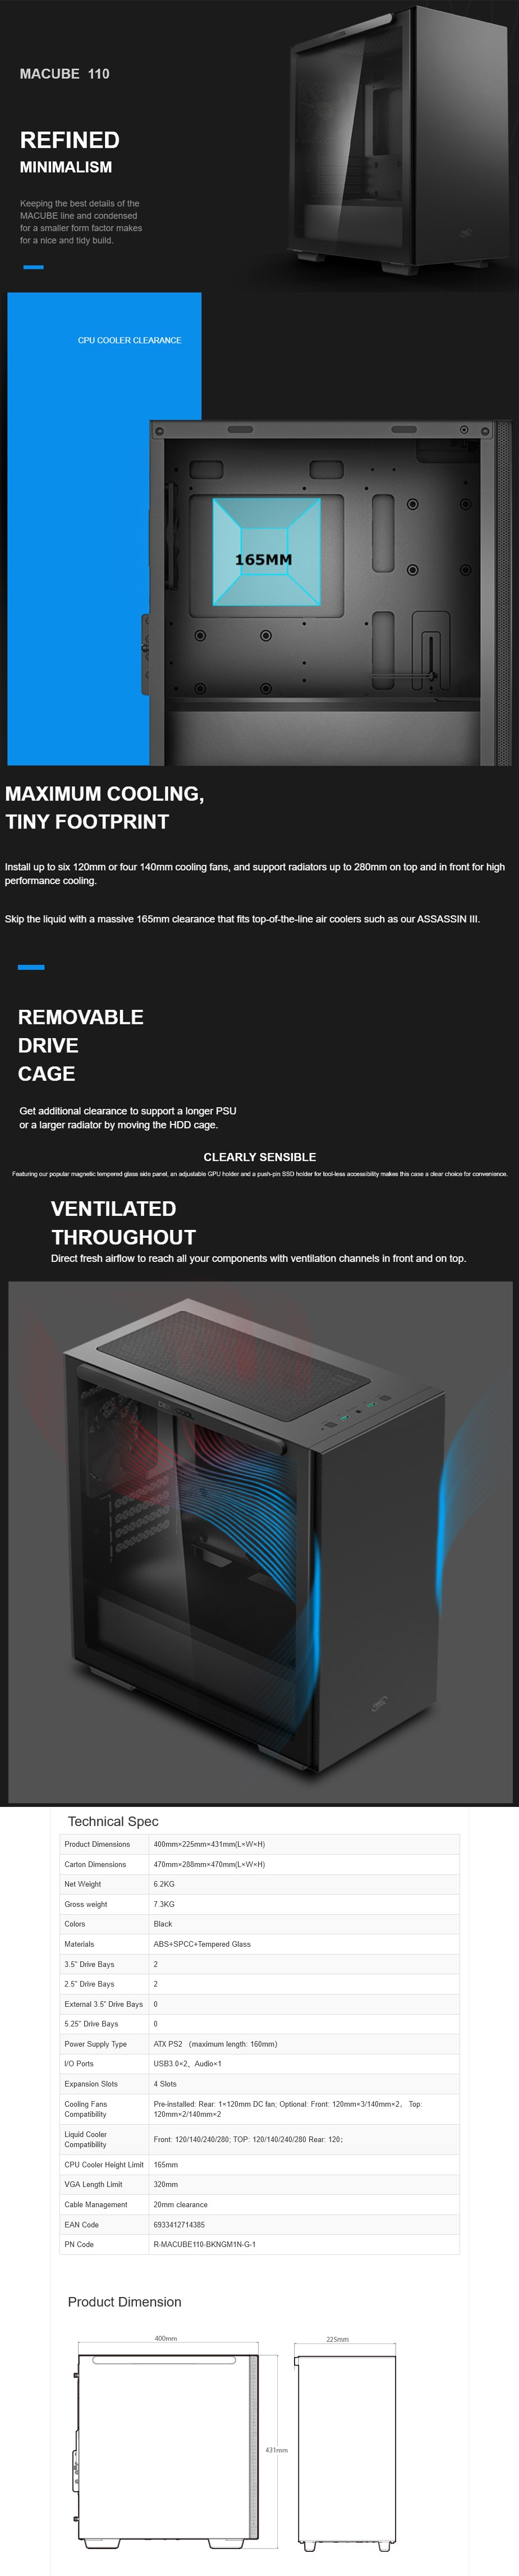 A large marketing image providing additional information about the product DeepCool Macube 110 Micro Tower Case - Black - Additional alt info not provided